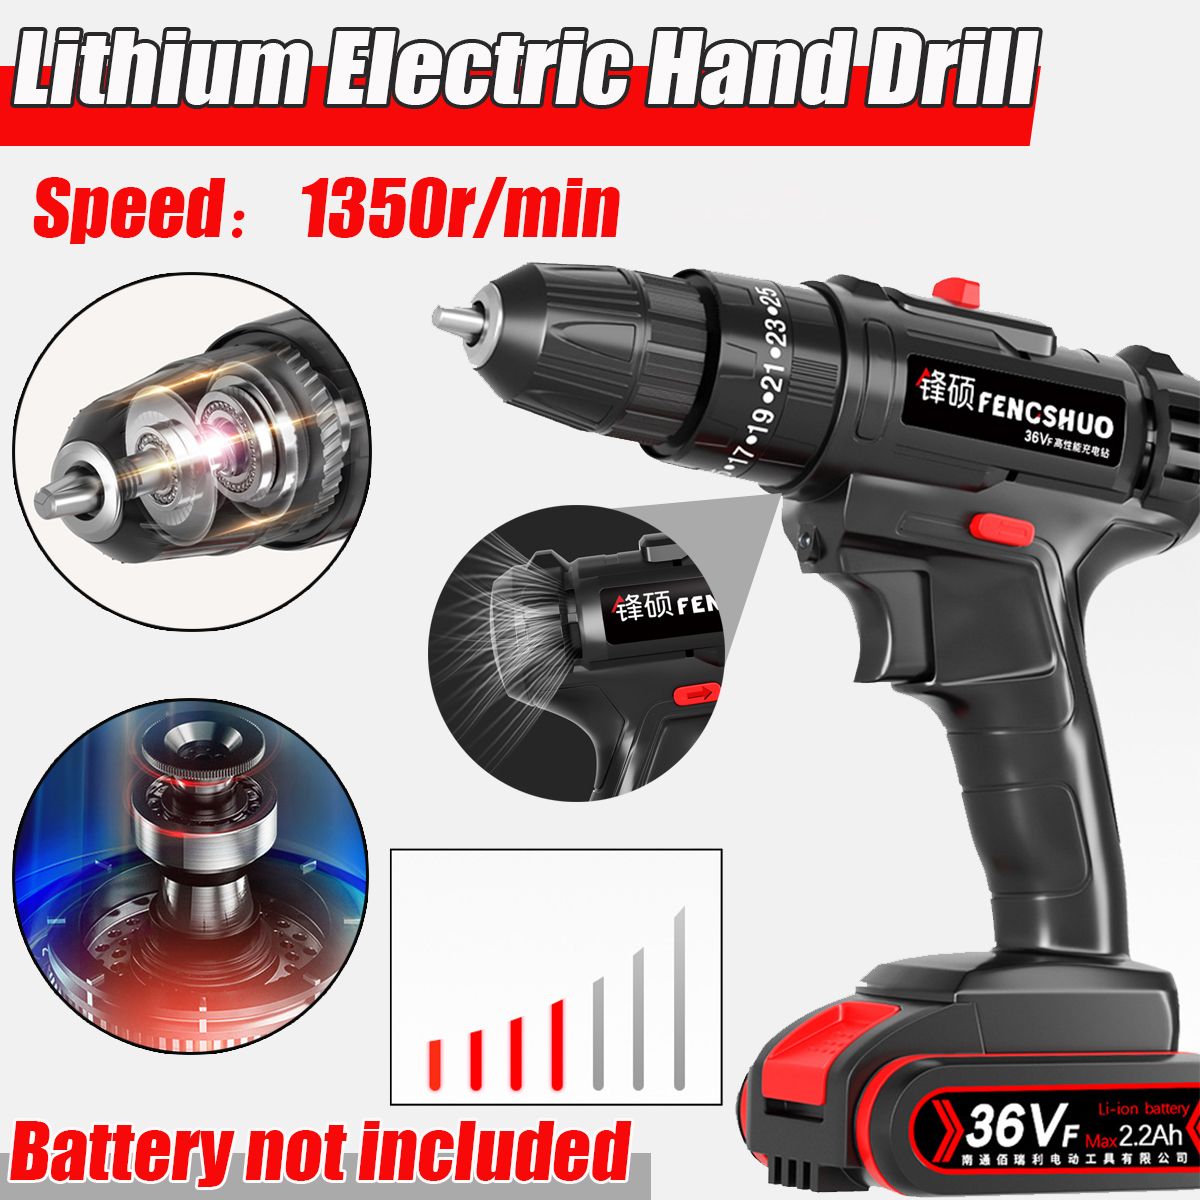 1350rmin-Rechargeable-Electric-Hand-Drill-Screwdriver-Multifunctional-For-36V-Lithium-Battery-1734591